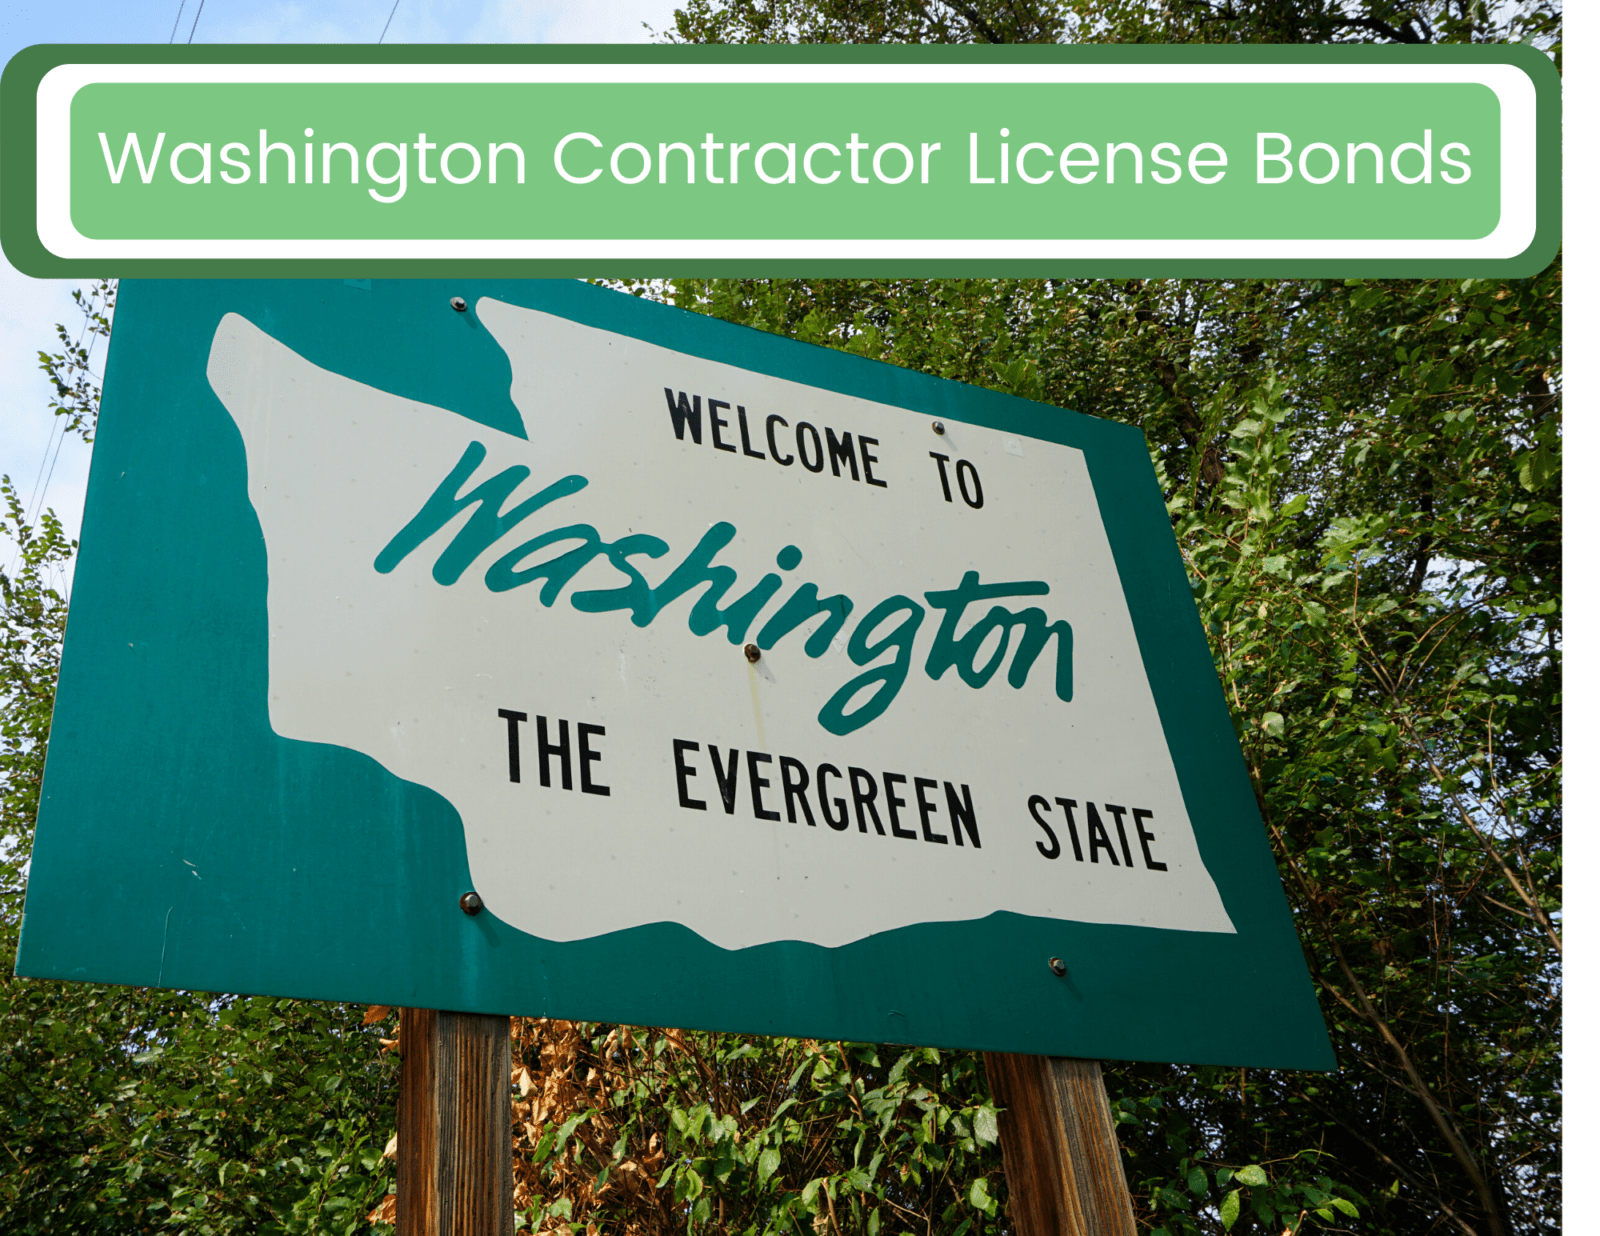 Washington Contractor License Bonds. Green picture of the Welcome to Washington sign.